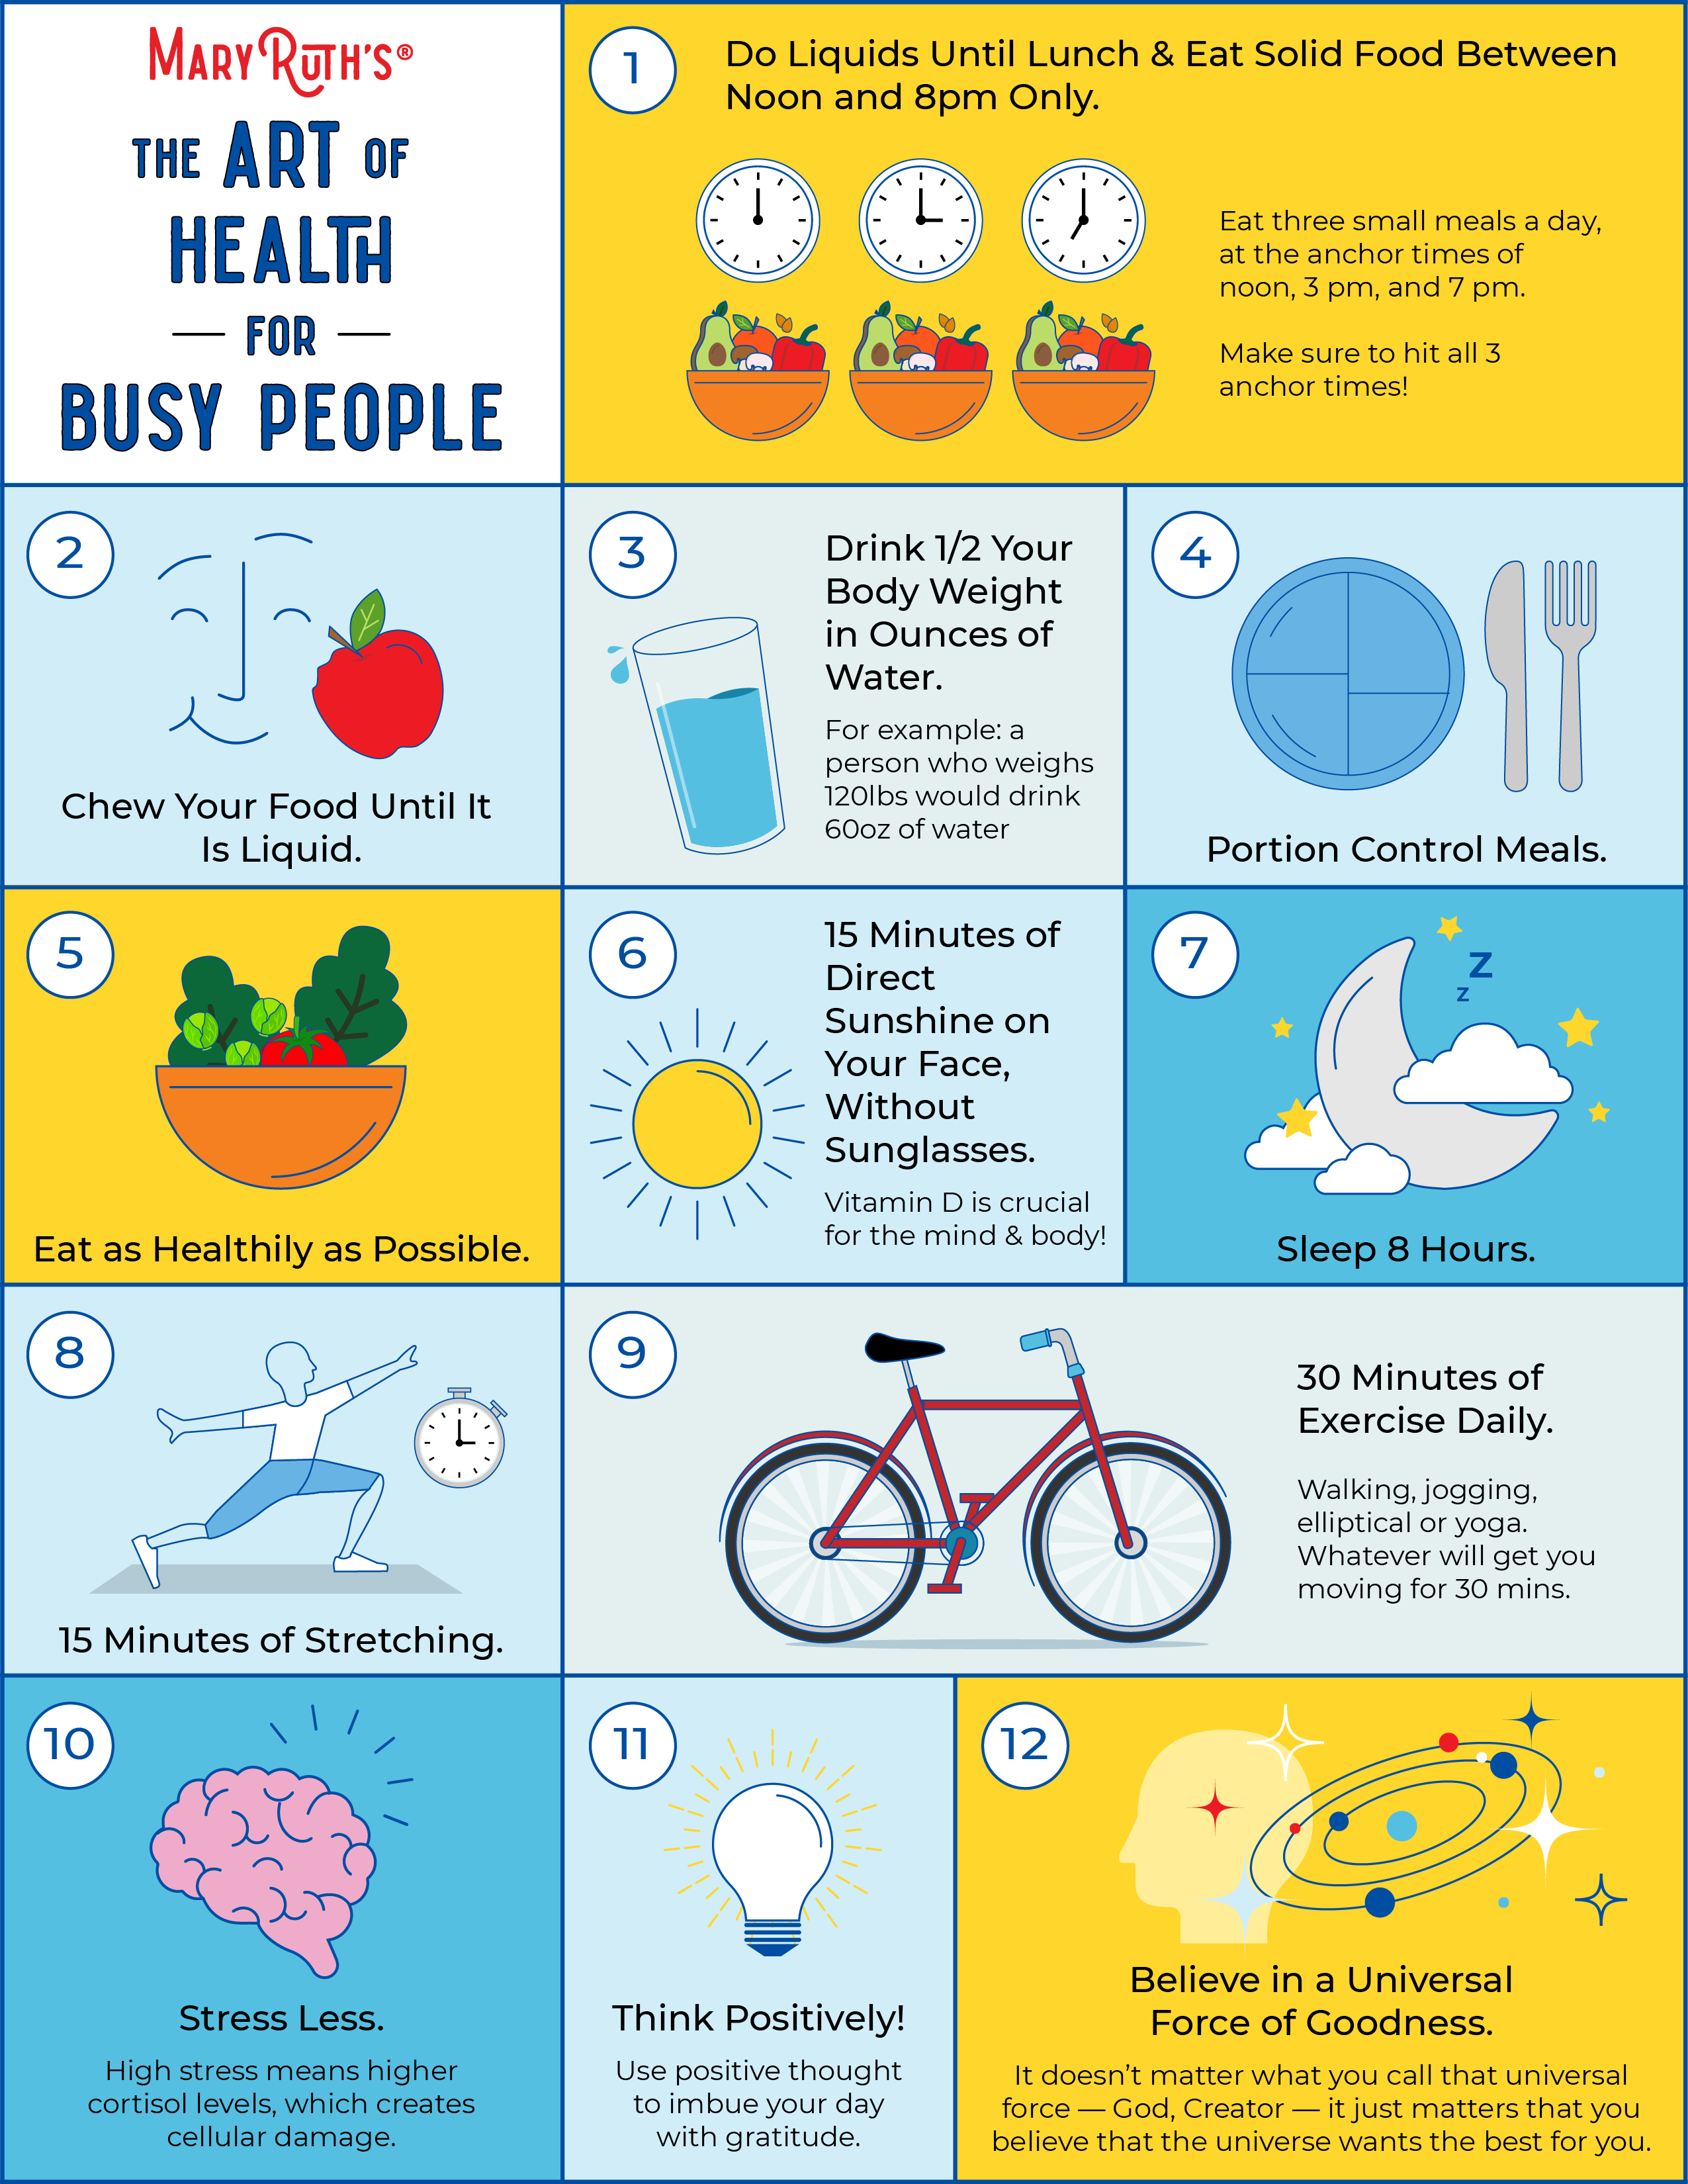 MaryRuth’s Tips for Living Well: The Art of Health for Busy People